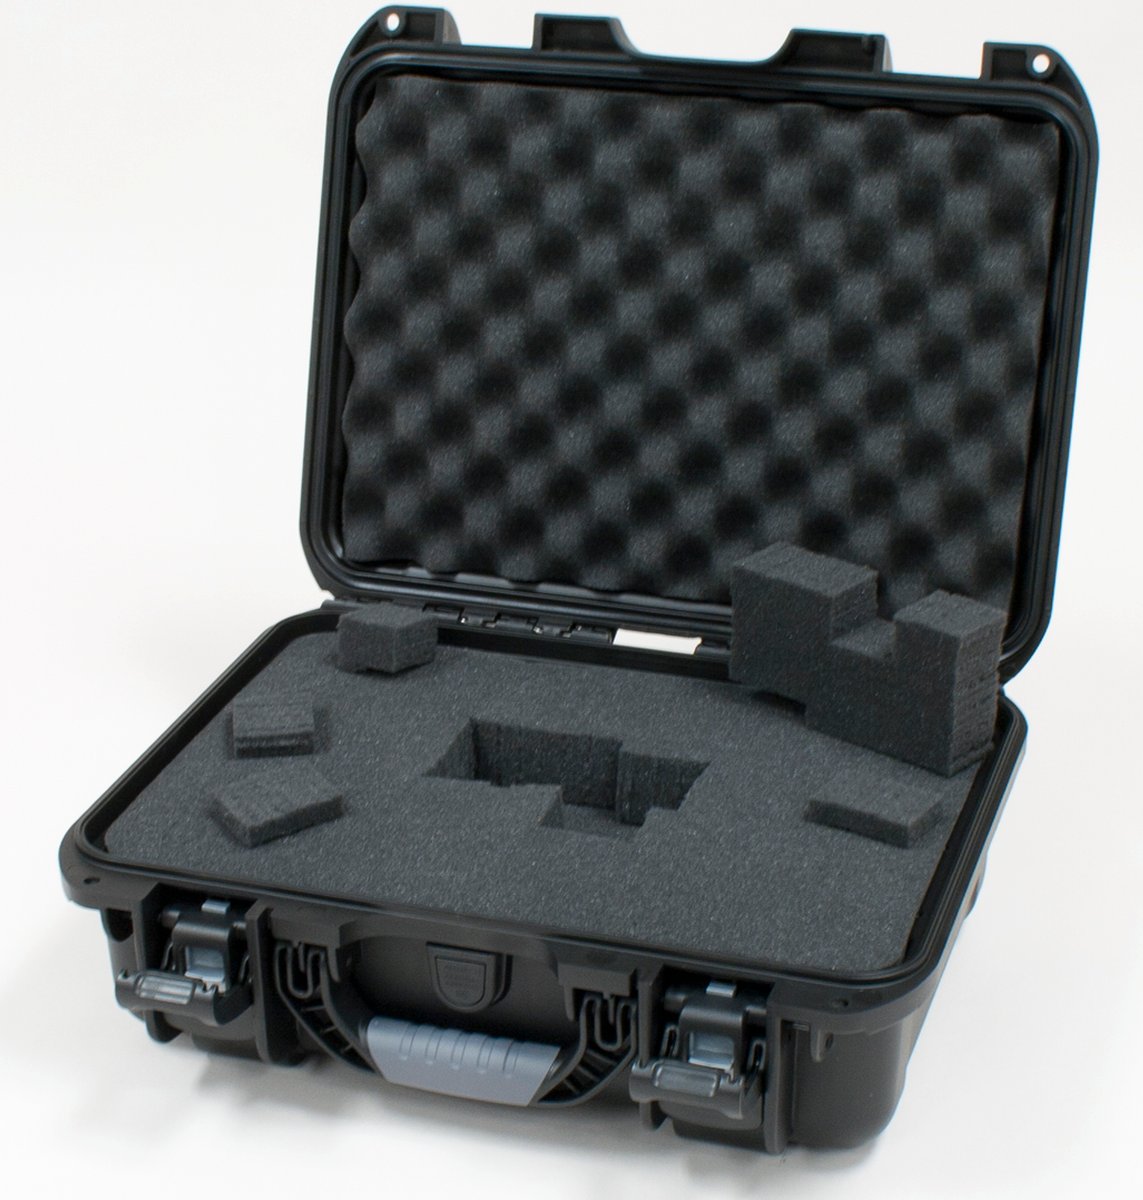 Black waterproof injection molded case with interior dimensions of 15" x 10.5" x 6.2". DICED FOAM